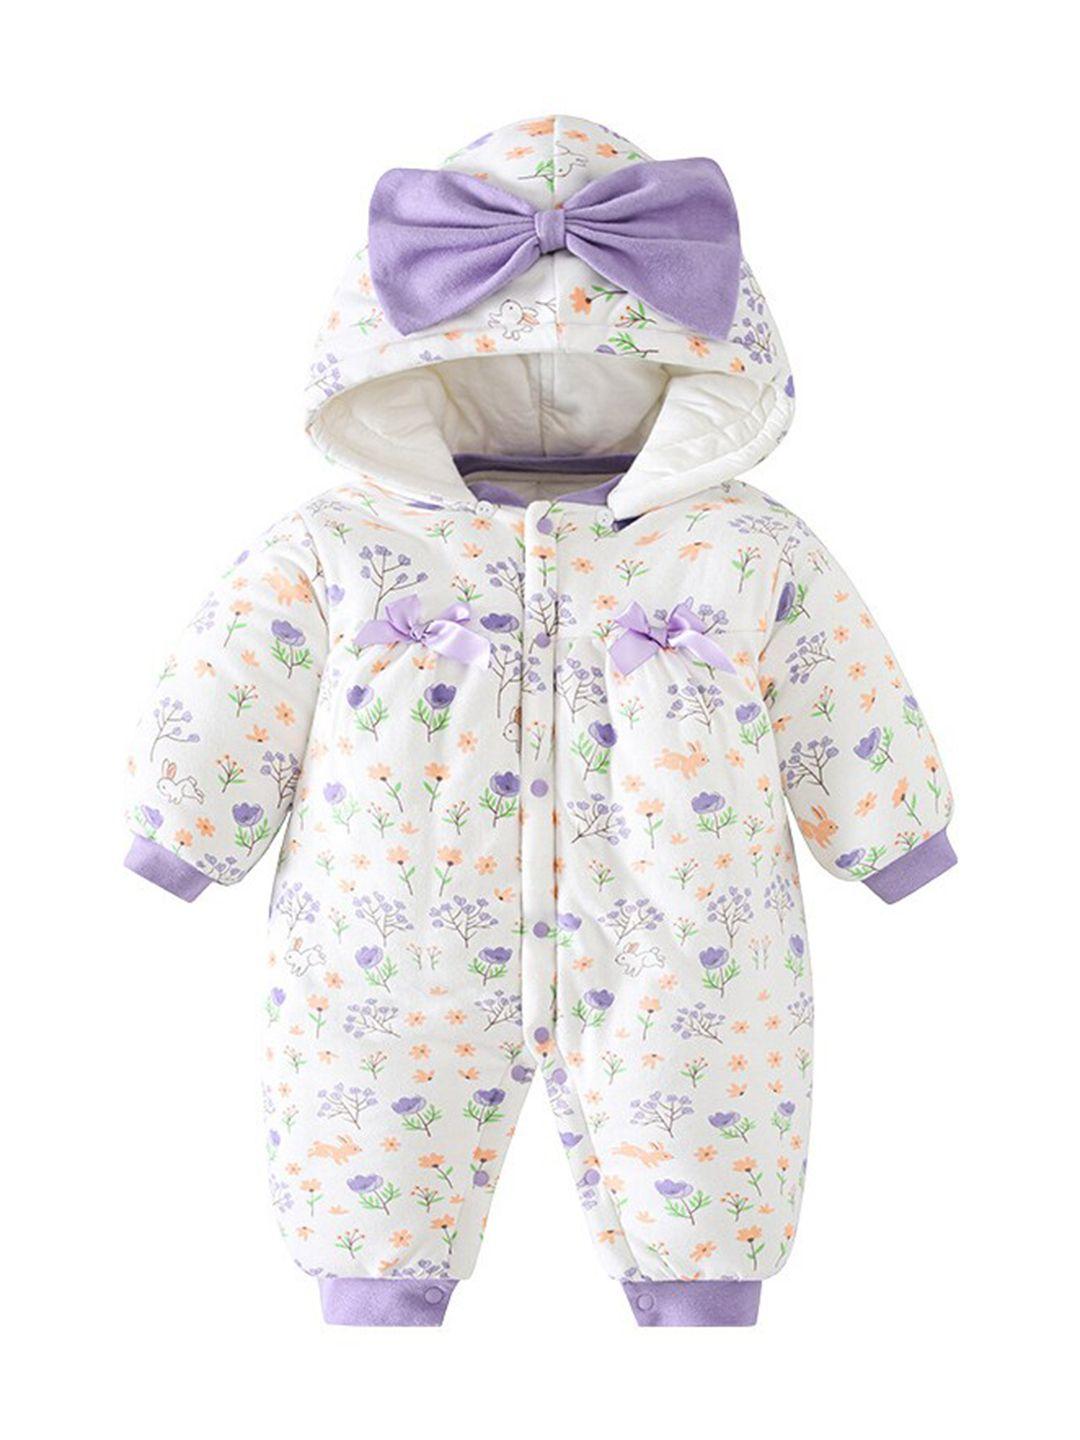 stylecast-infant-girls-printed-hooded-rompers